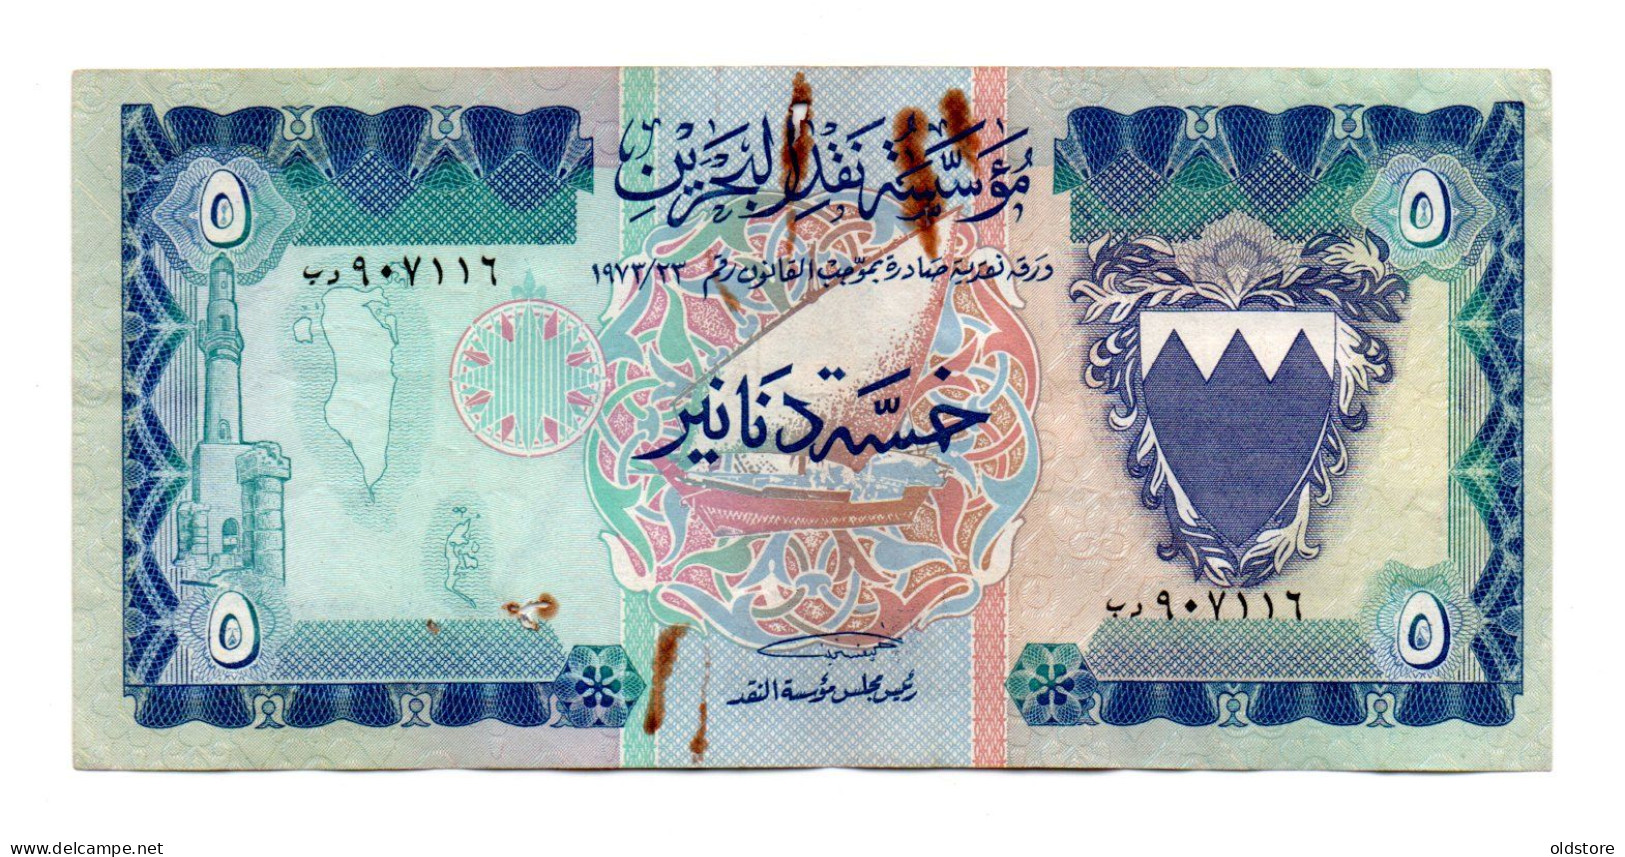 Bahrain Banknotes - 5 Dinars - Second Edition - ND 1973 - Used Condition - Bahrain